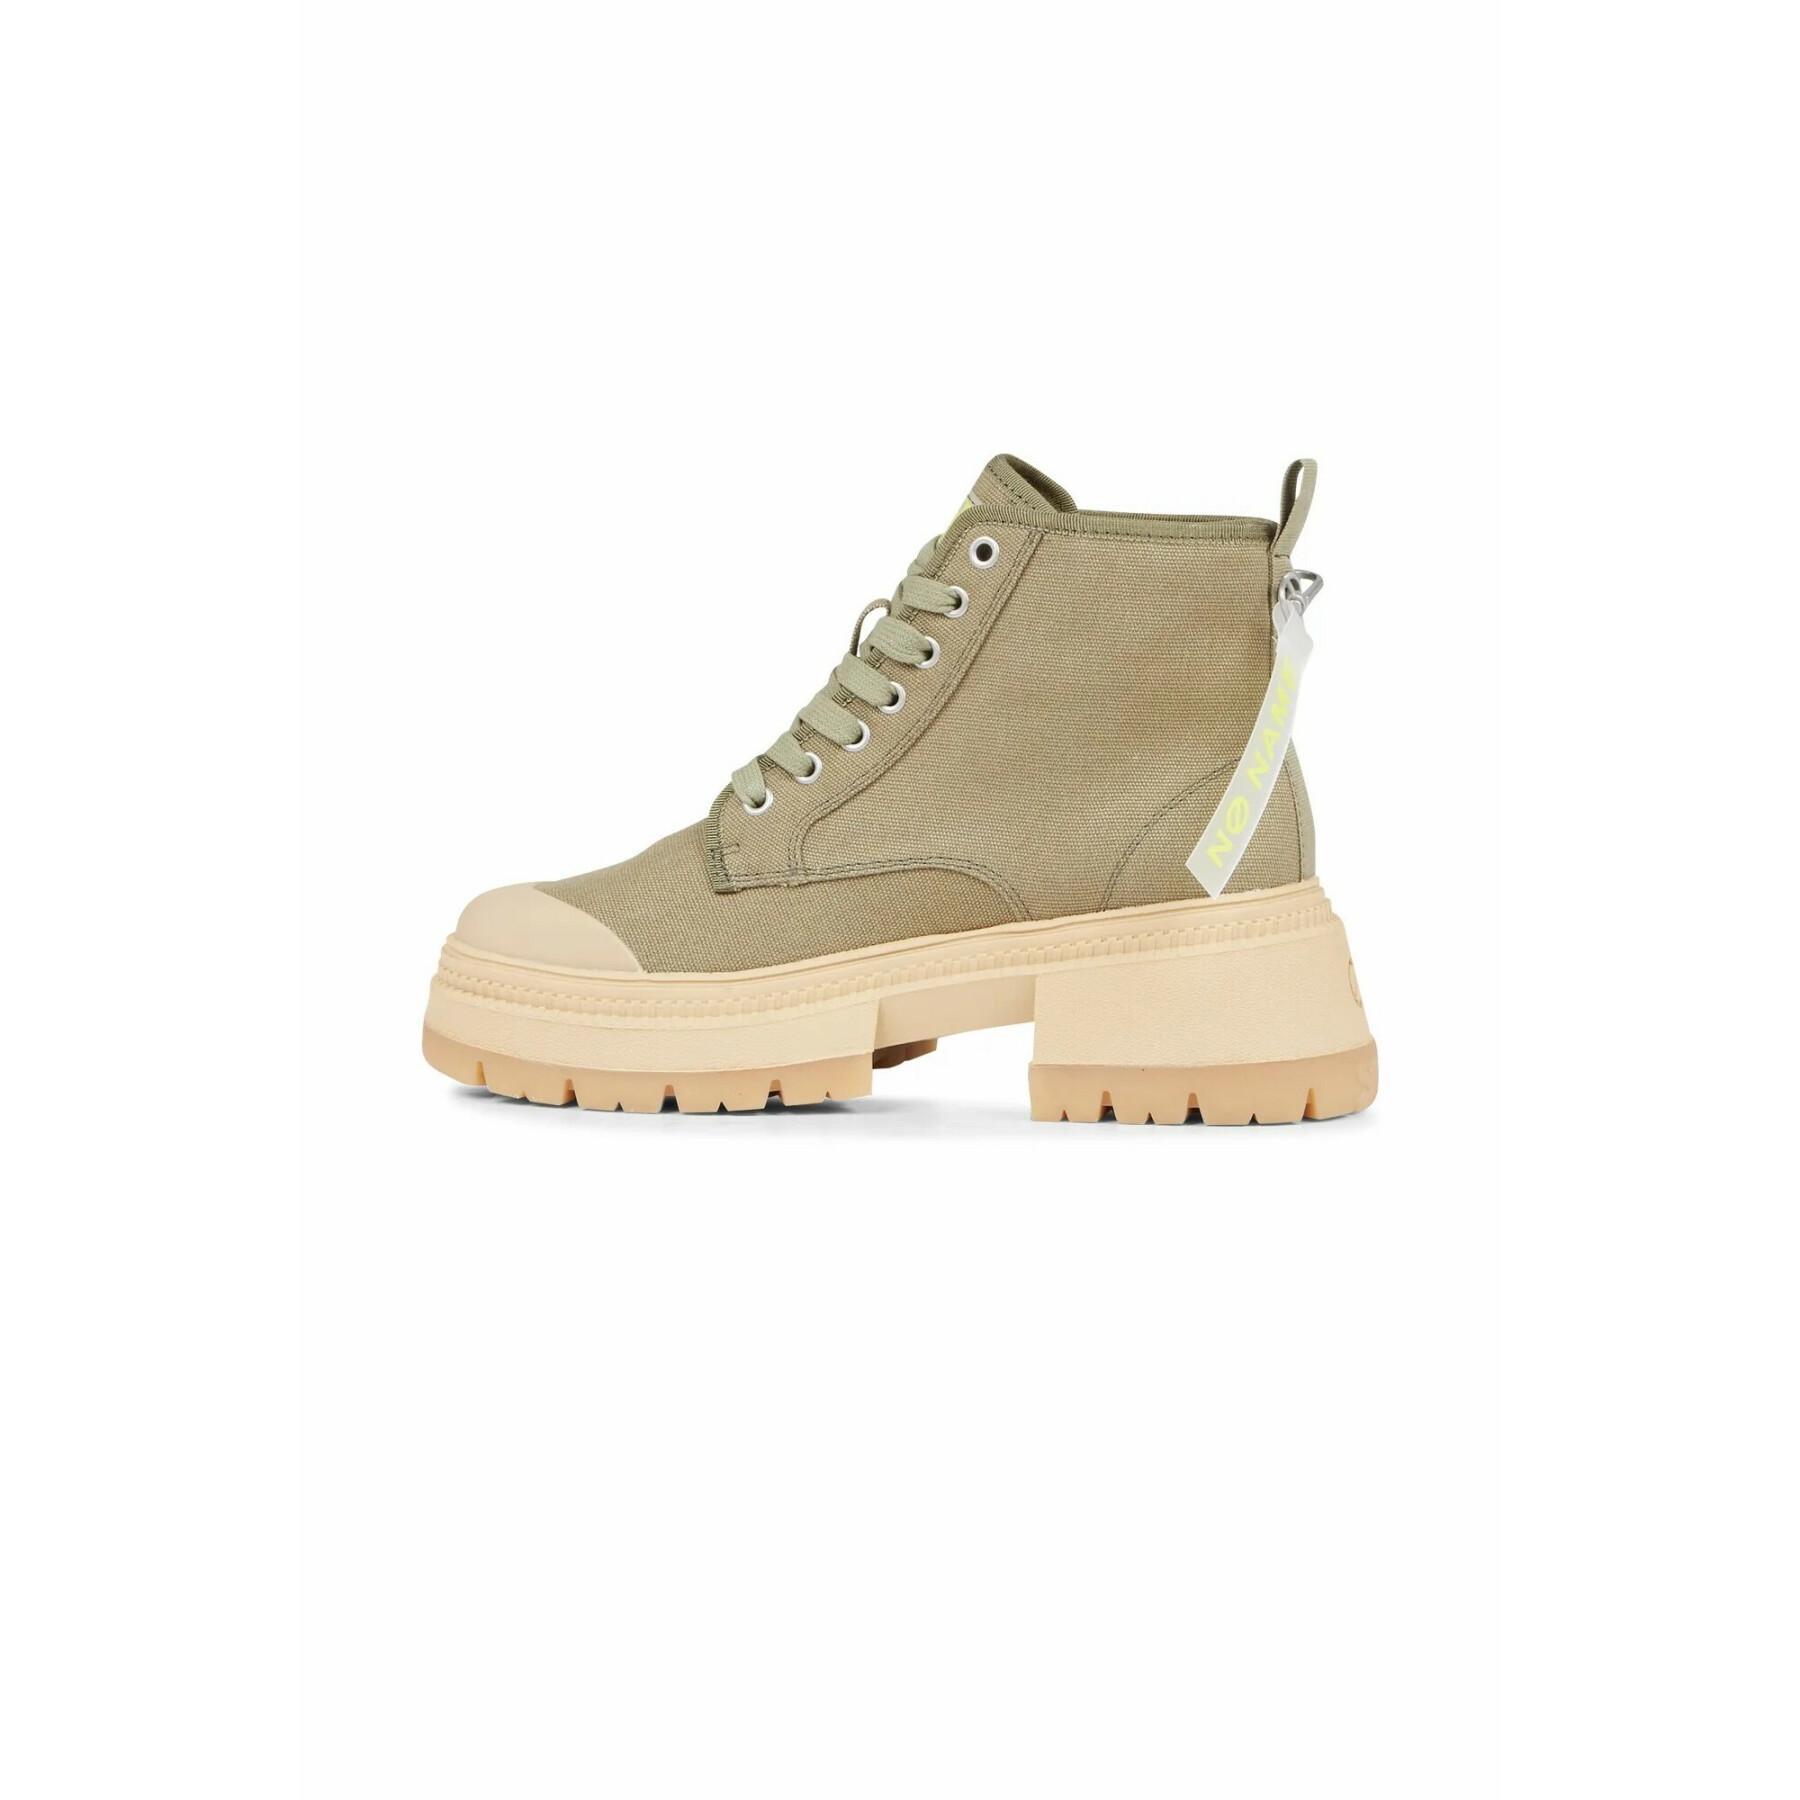 Women's sneakers No Name Strong boots canvas recycled